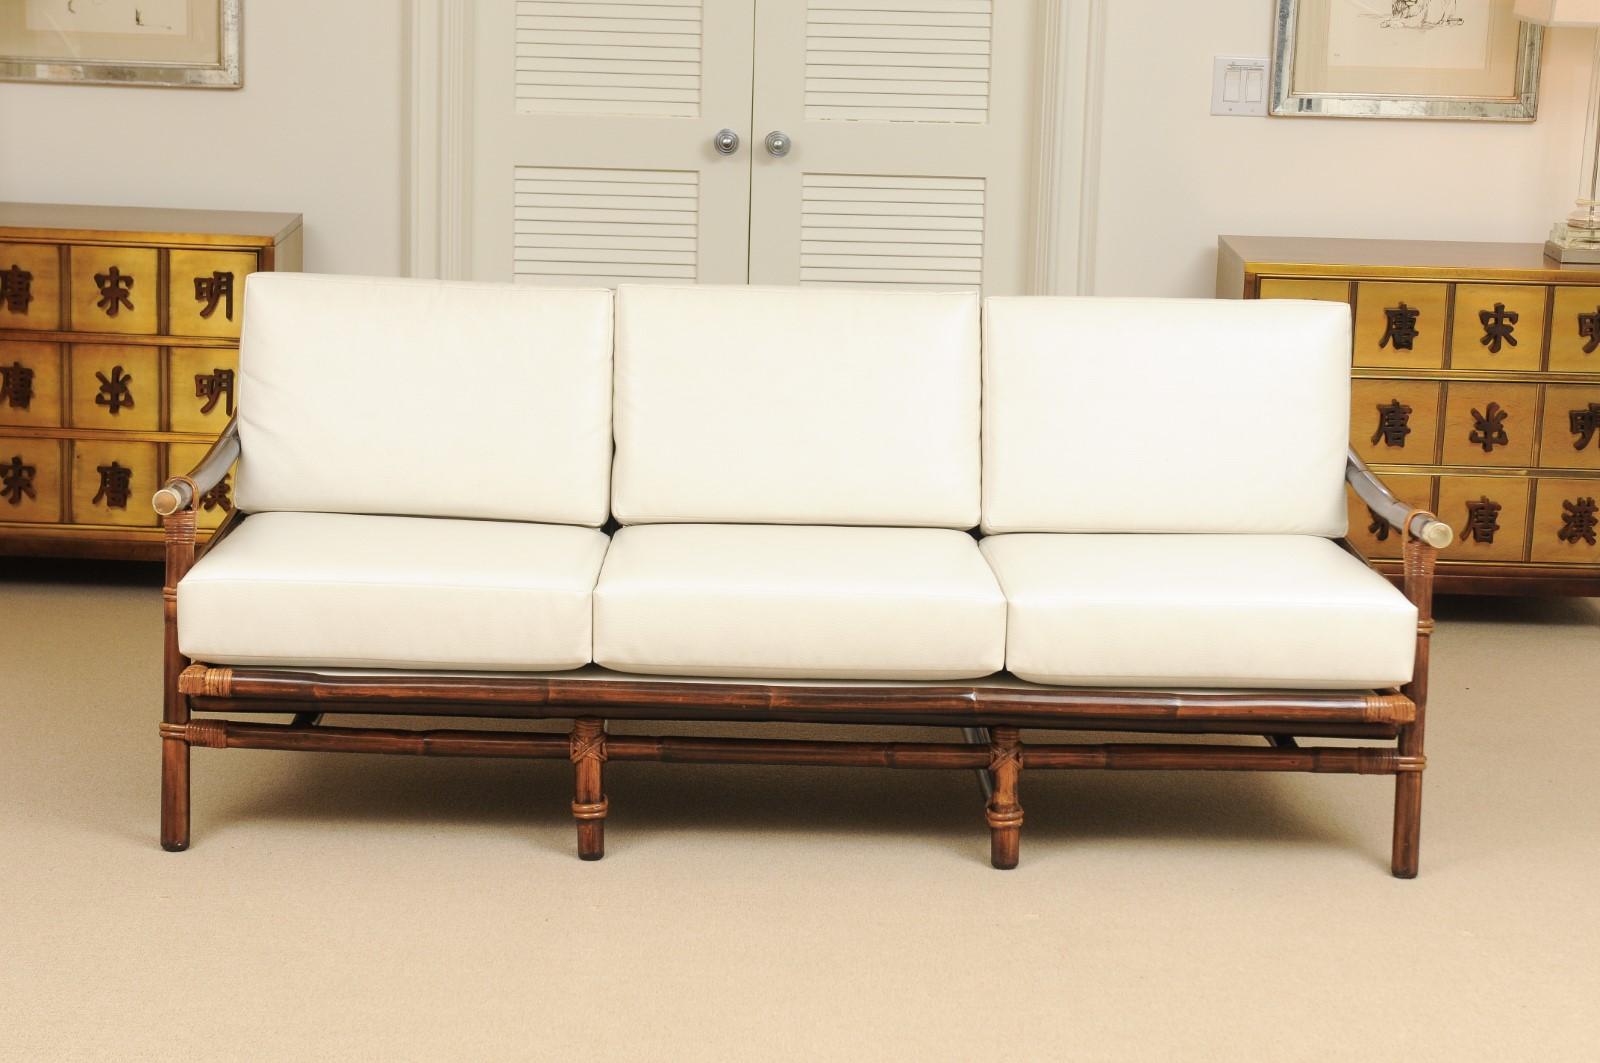 Rare Restored Campaign Sofa by John Wisner for Ficks Reed, circa 1954 For Sale 5